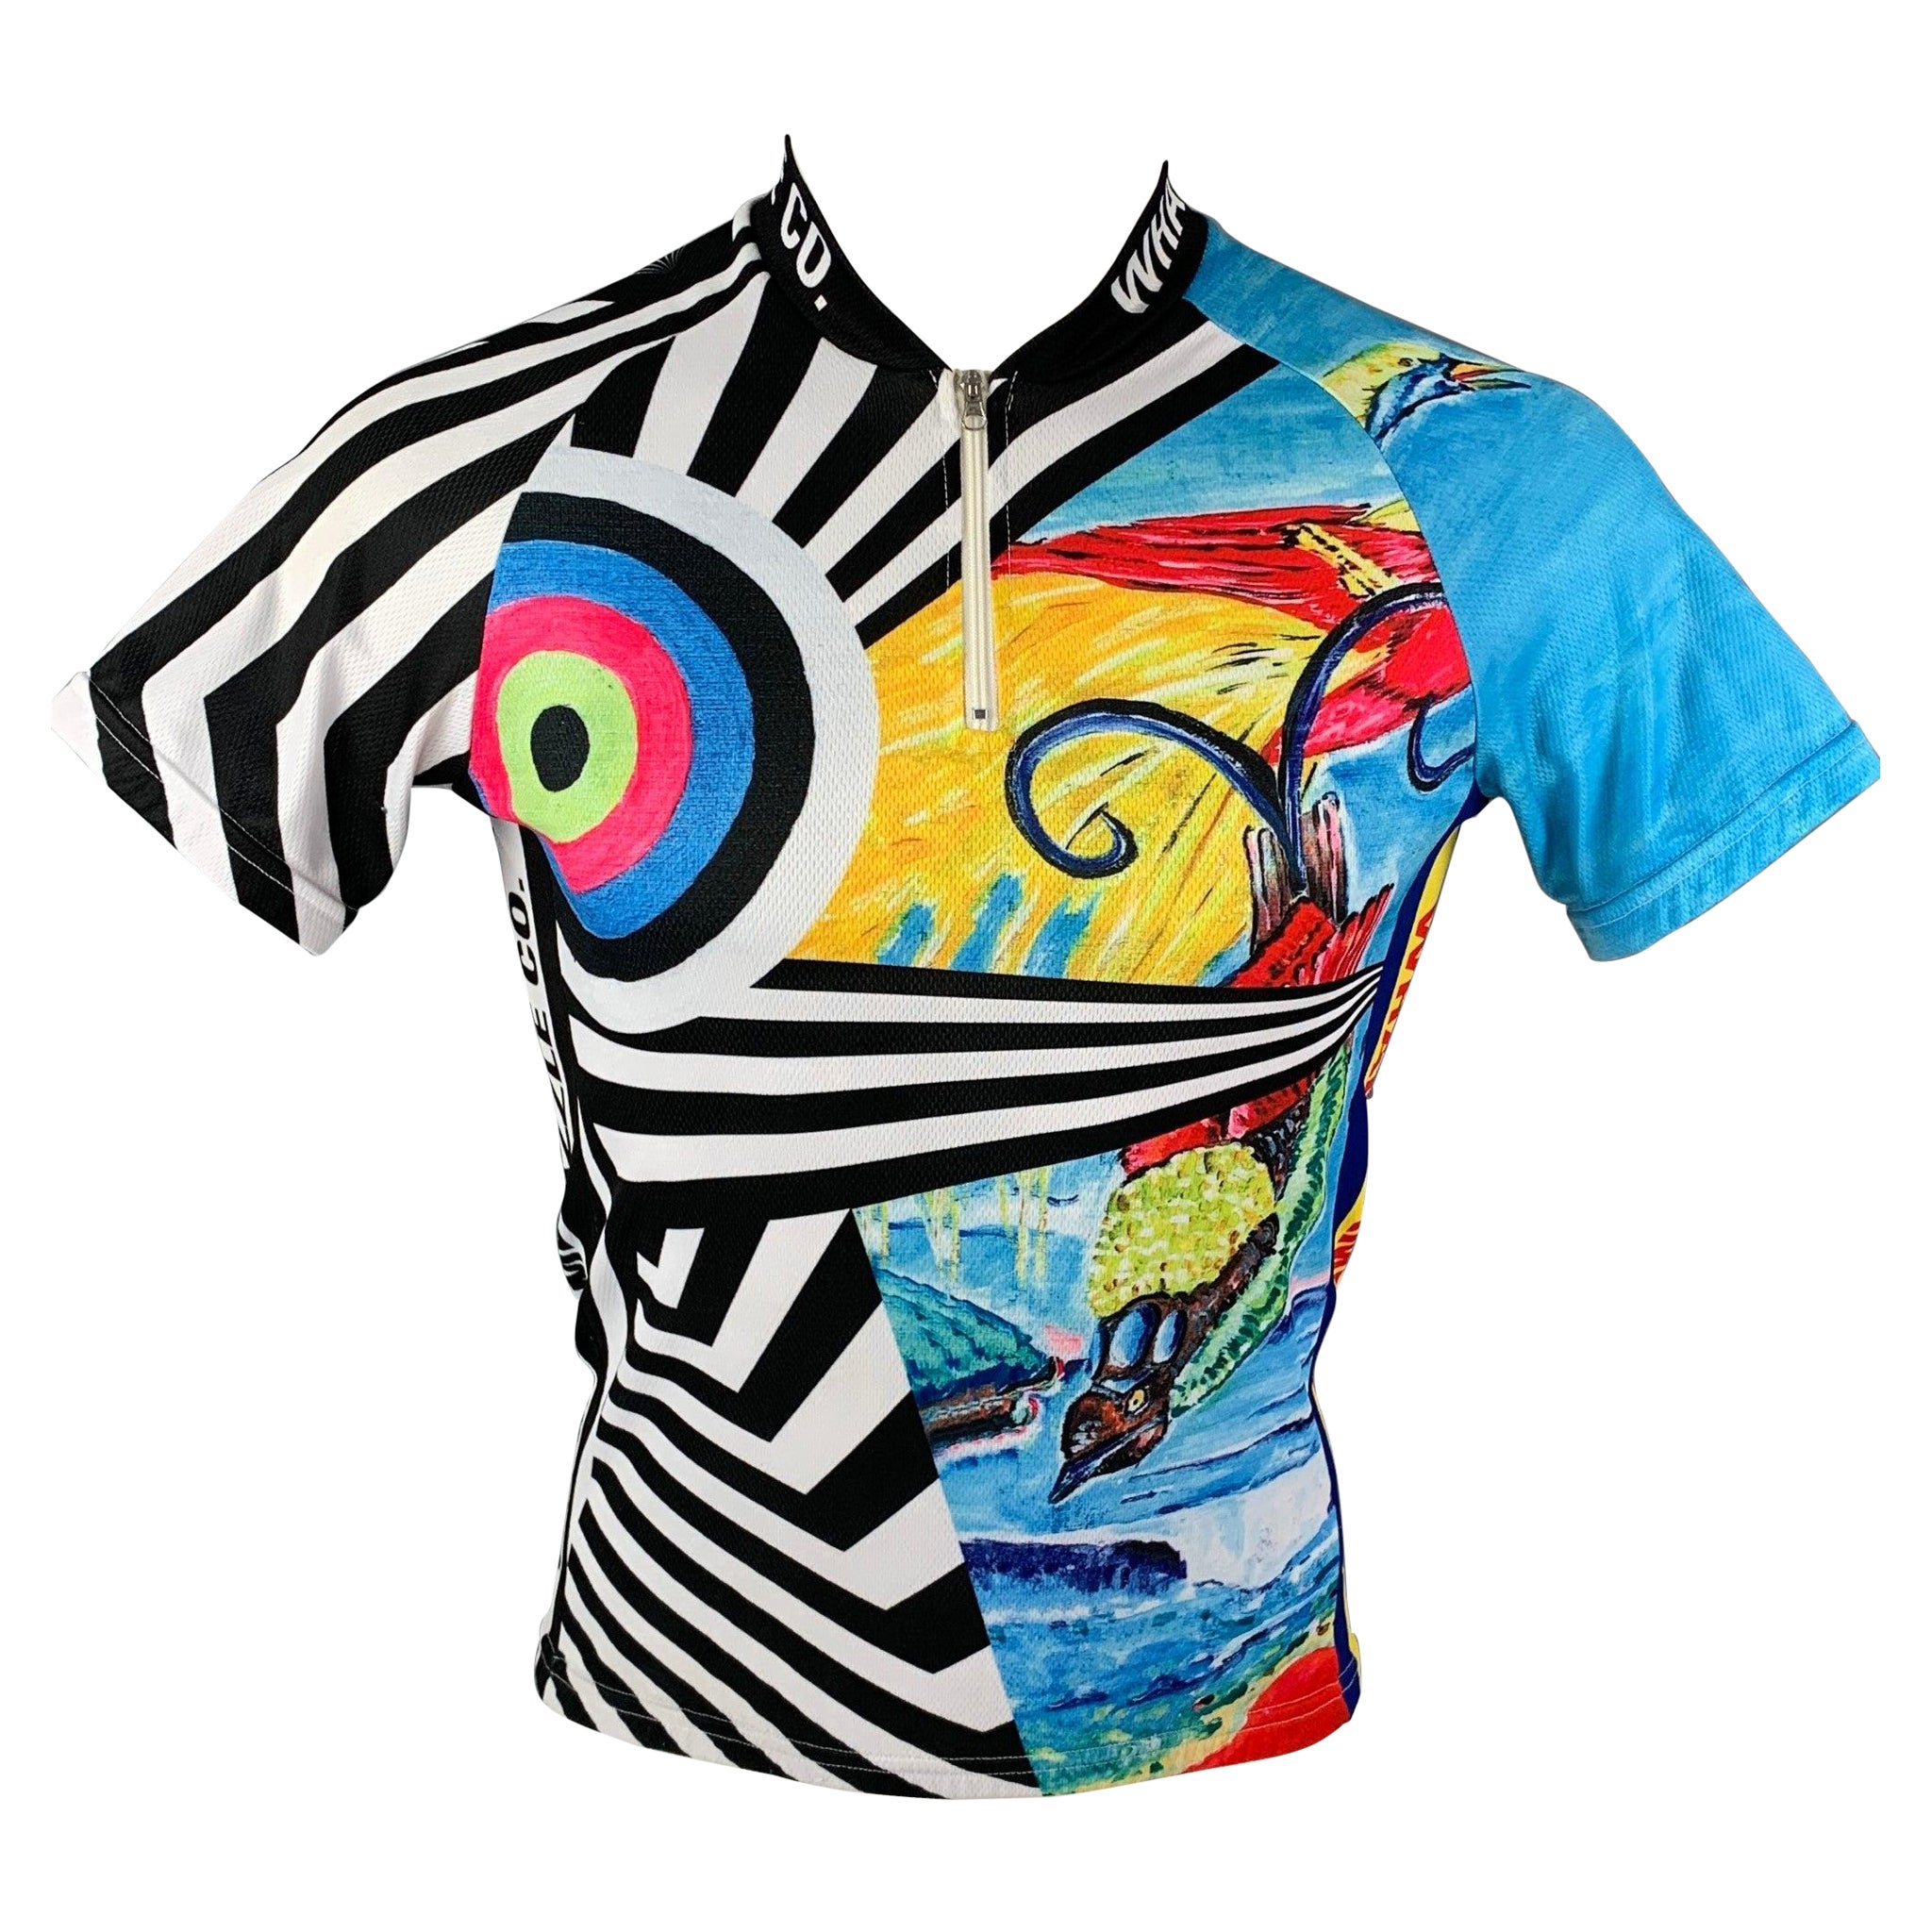 WALTER VAN BEIRENDONCK SS15 Size S Multi-Color Scooter Laforge Jersey Bike Top For Sale